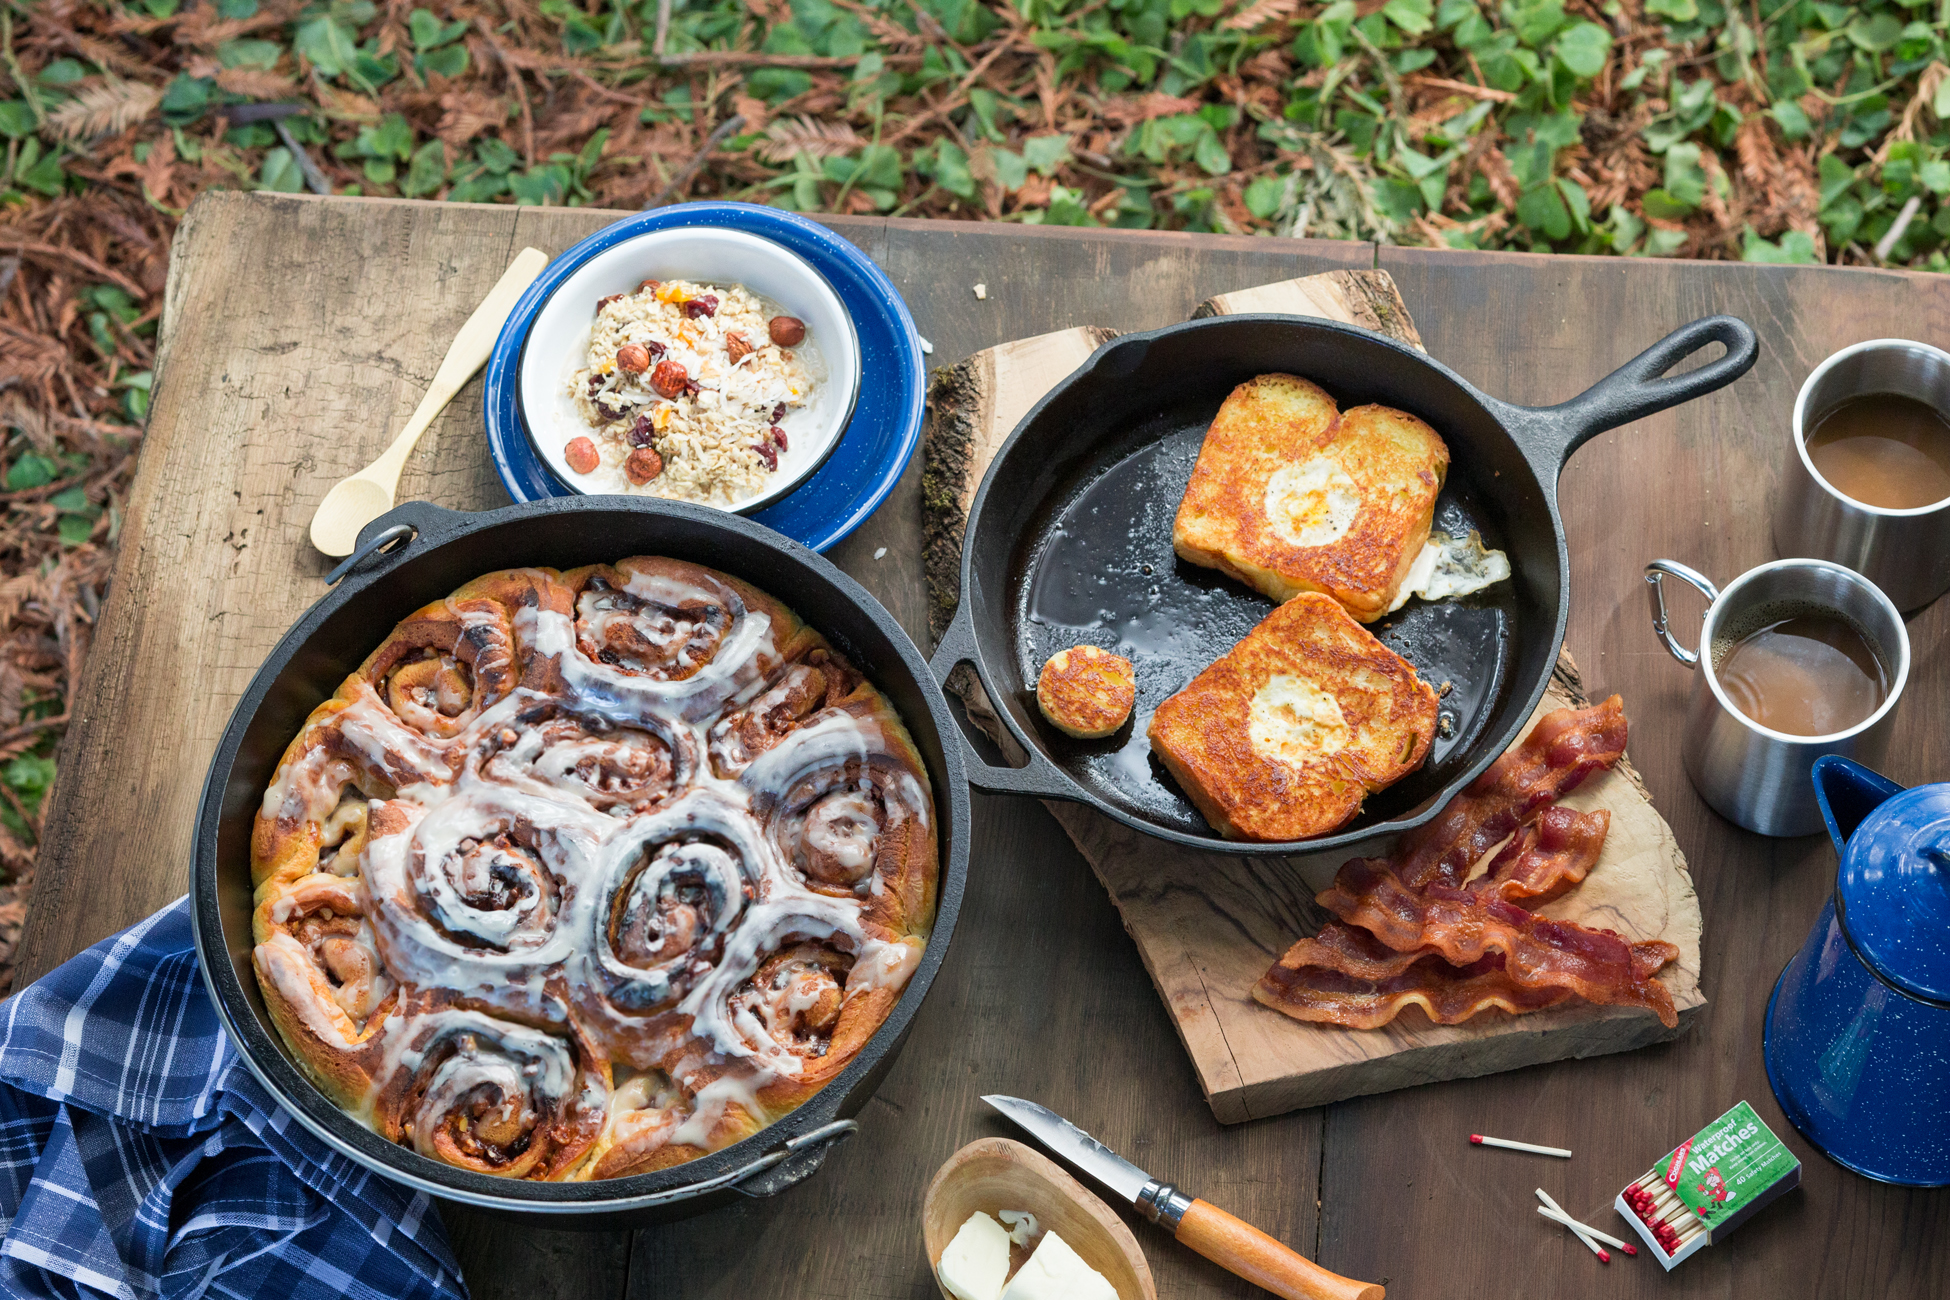 What Is a Dutch Oven and How to Use It for Cooking